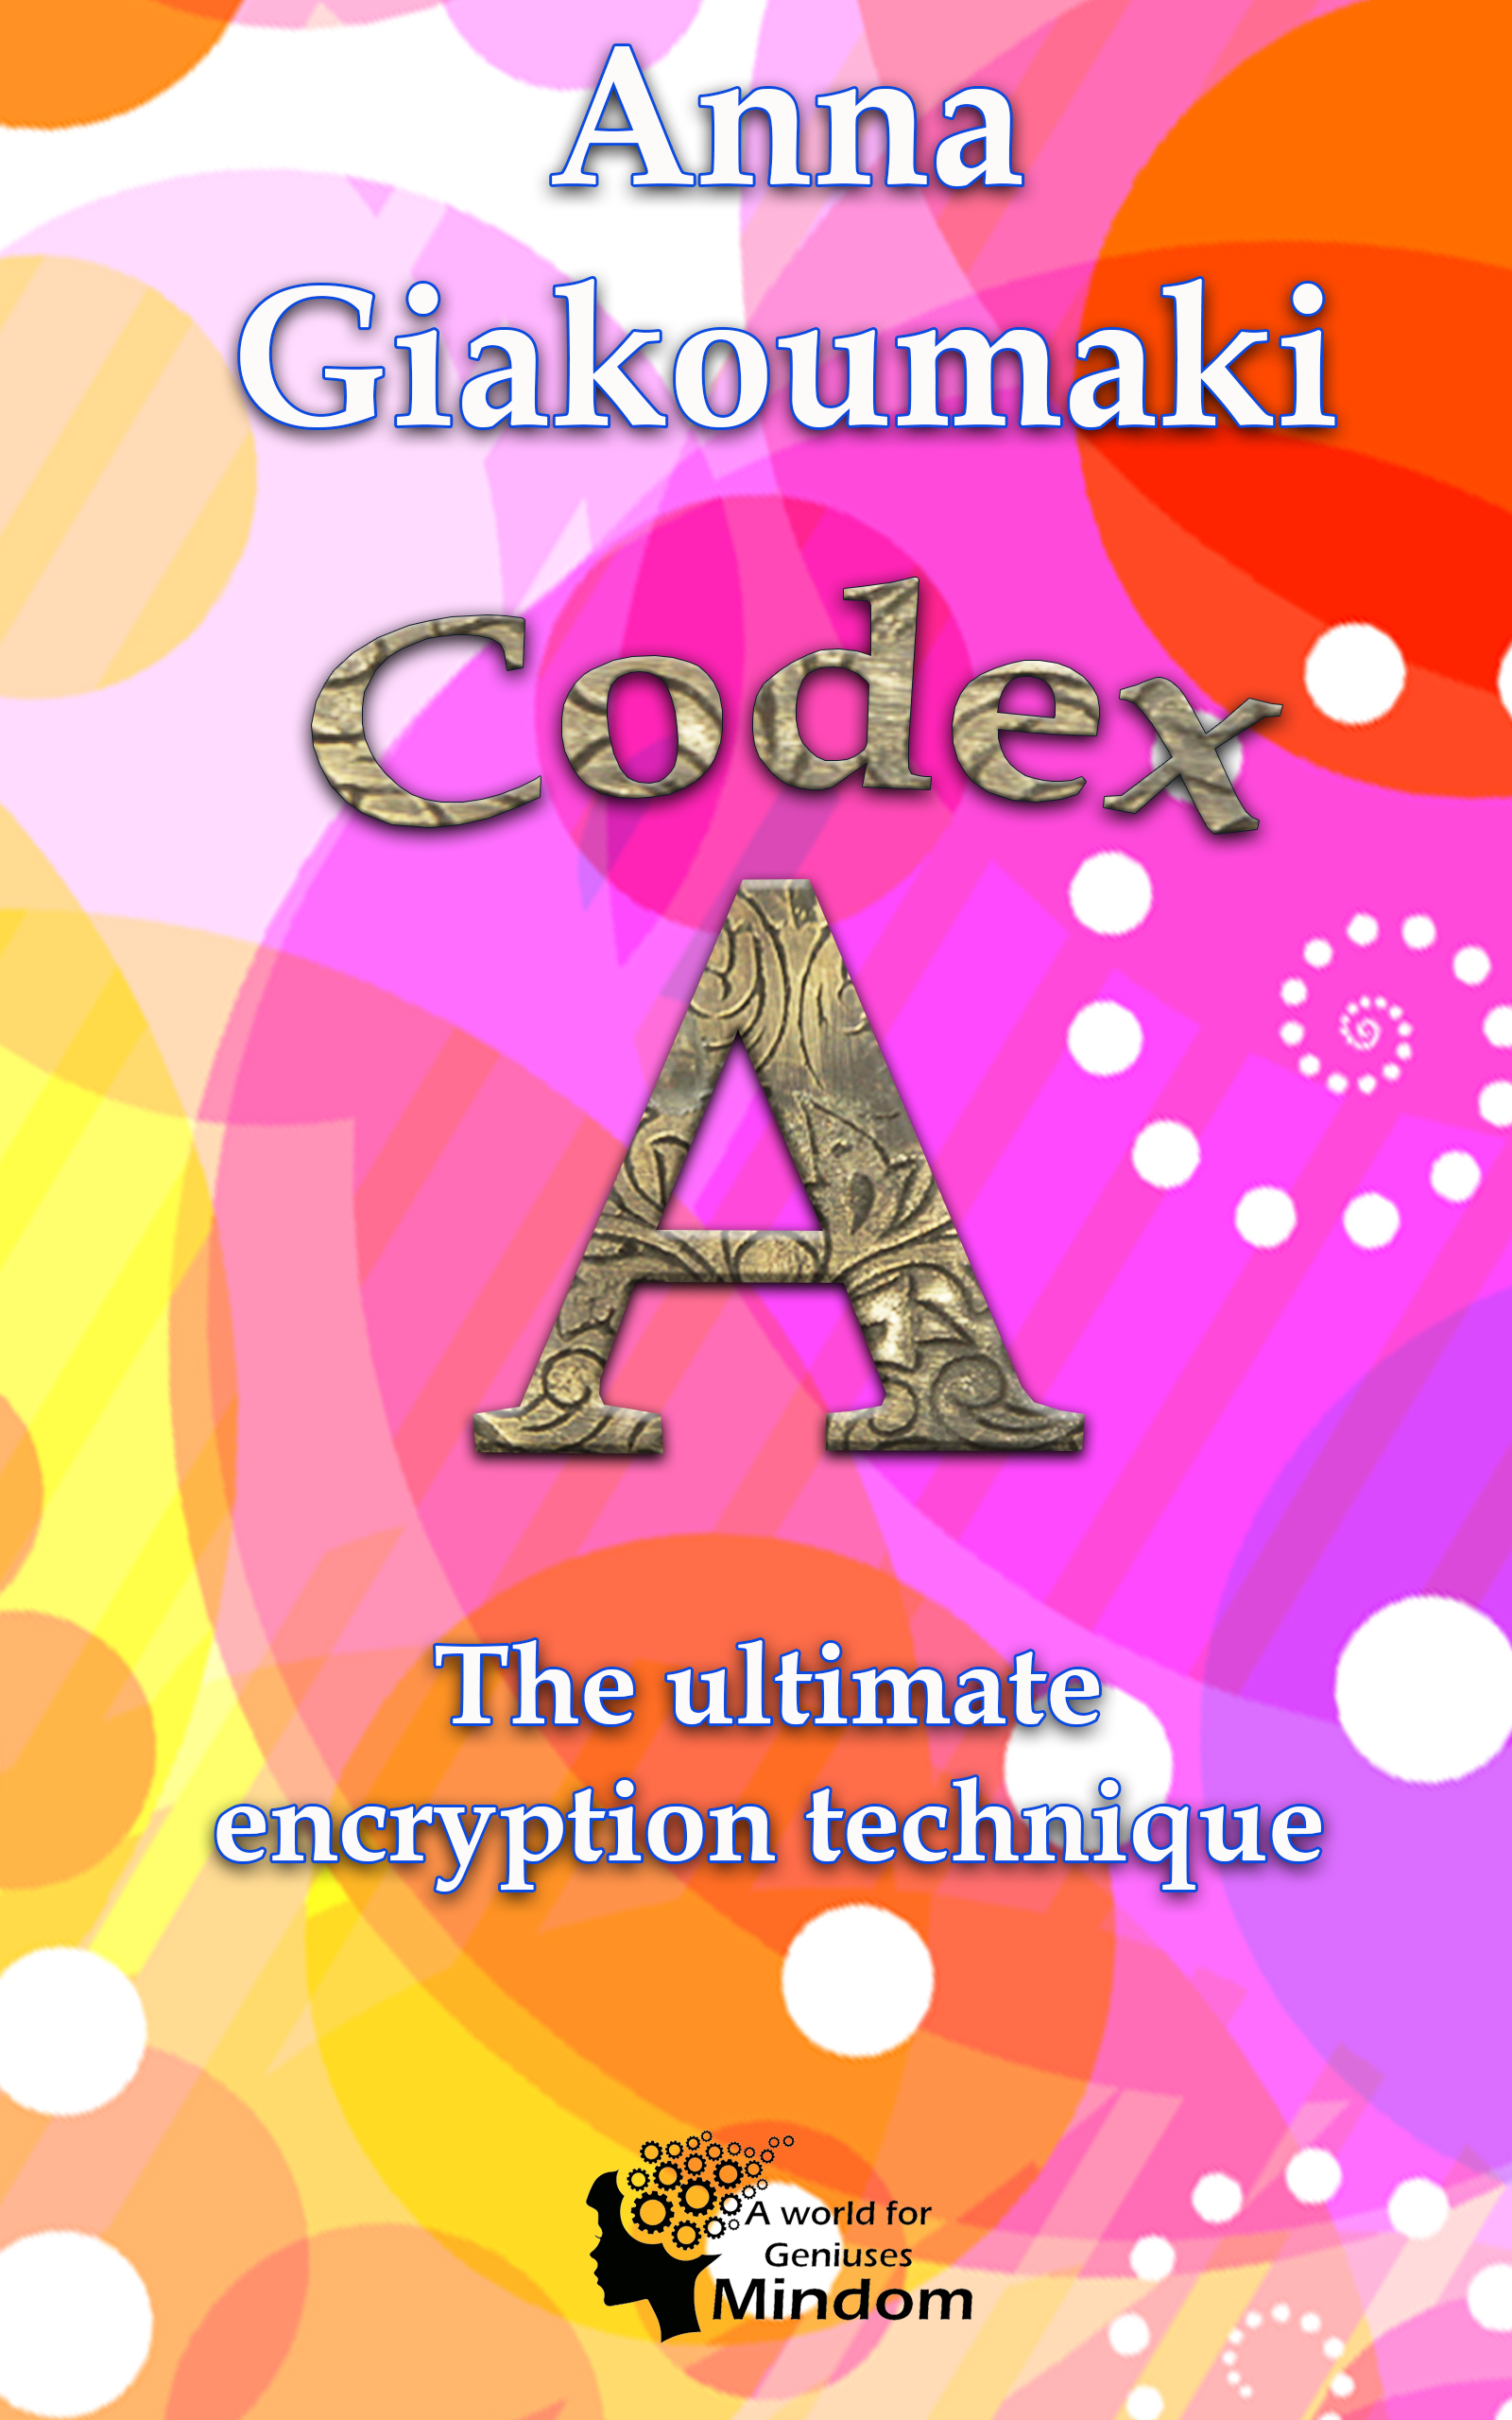 FREE: Codex A: The ultimate encryption technique for diaries & notebooks by Anna Giakoumaki